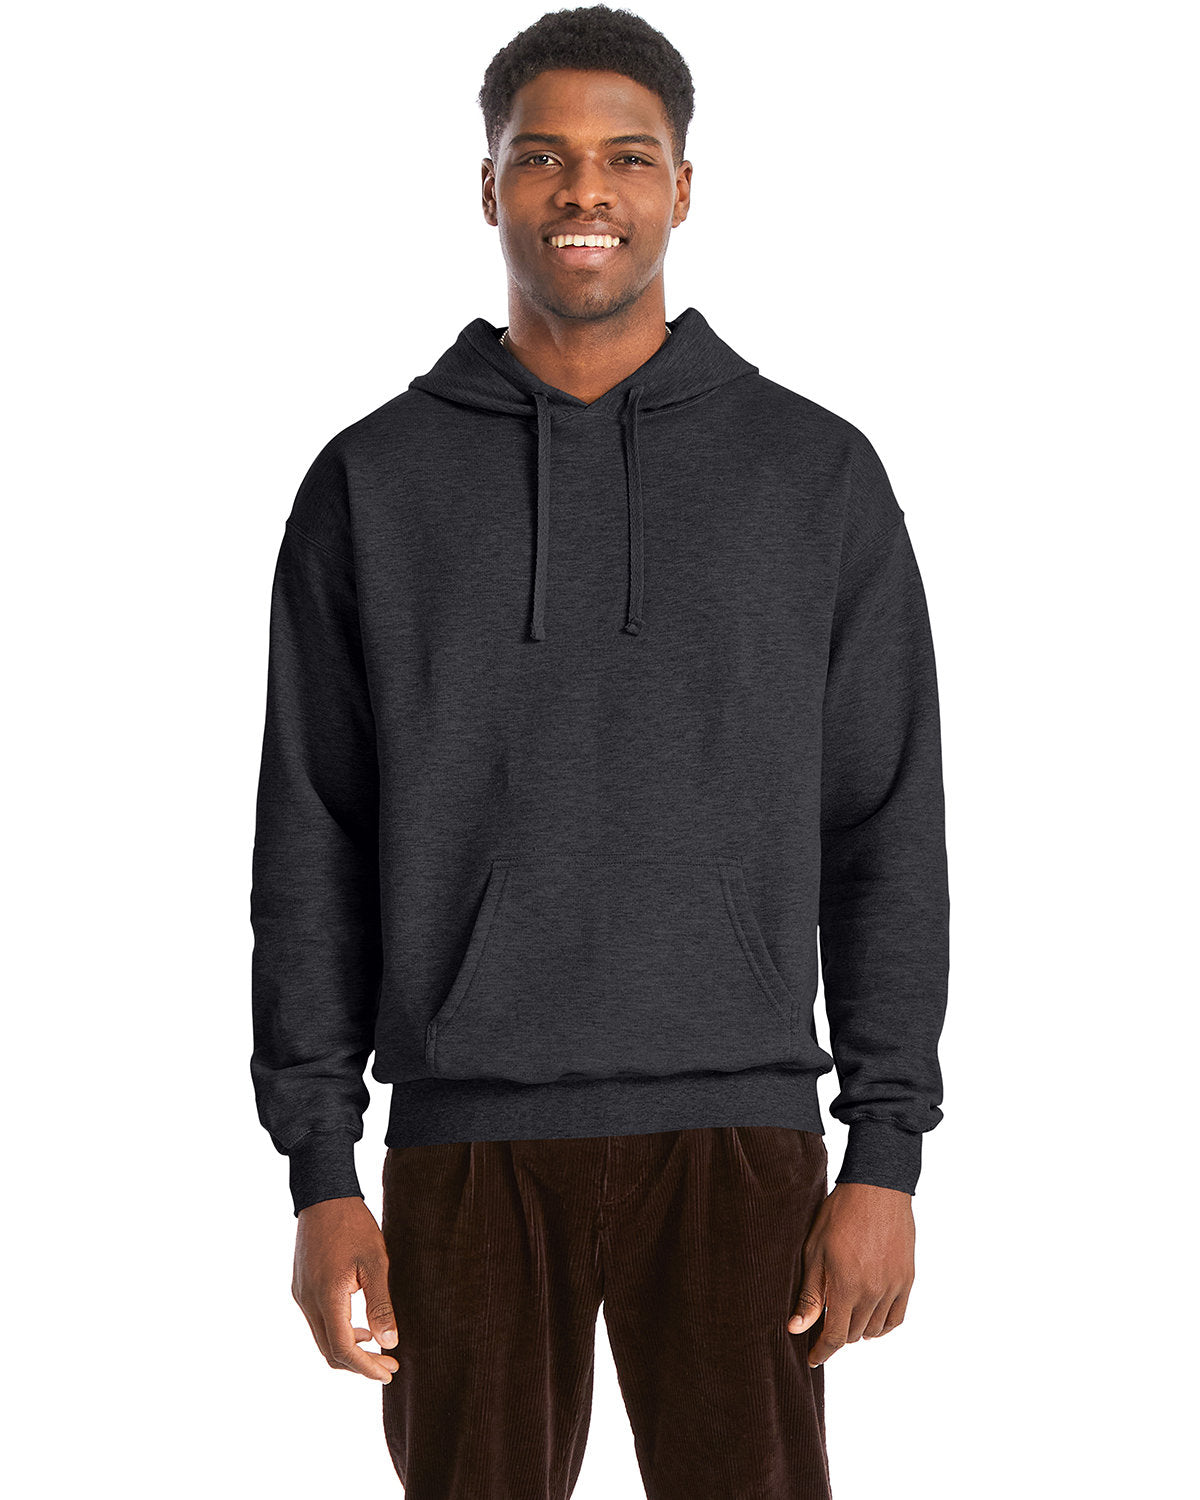 EXPERIENCE-SUPREME-COMFORT-WITH-THE-HANES-ADULT-PERFECT-SWEATS-PULLOVER-HOODED-SWEATSHIRT